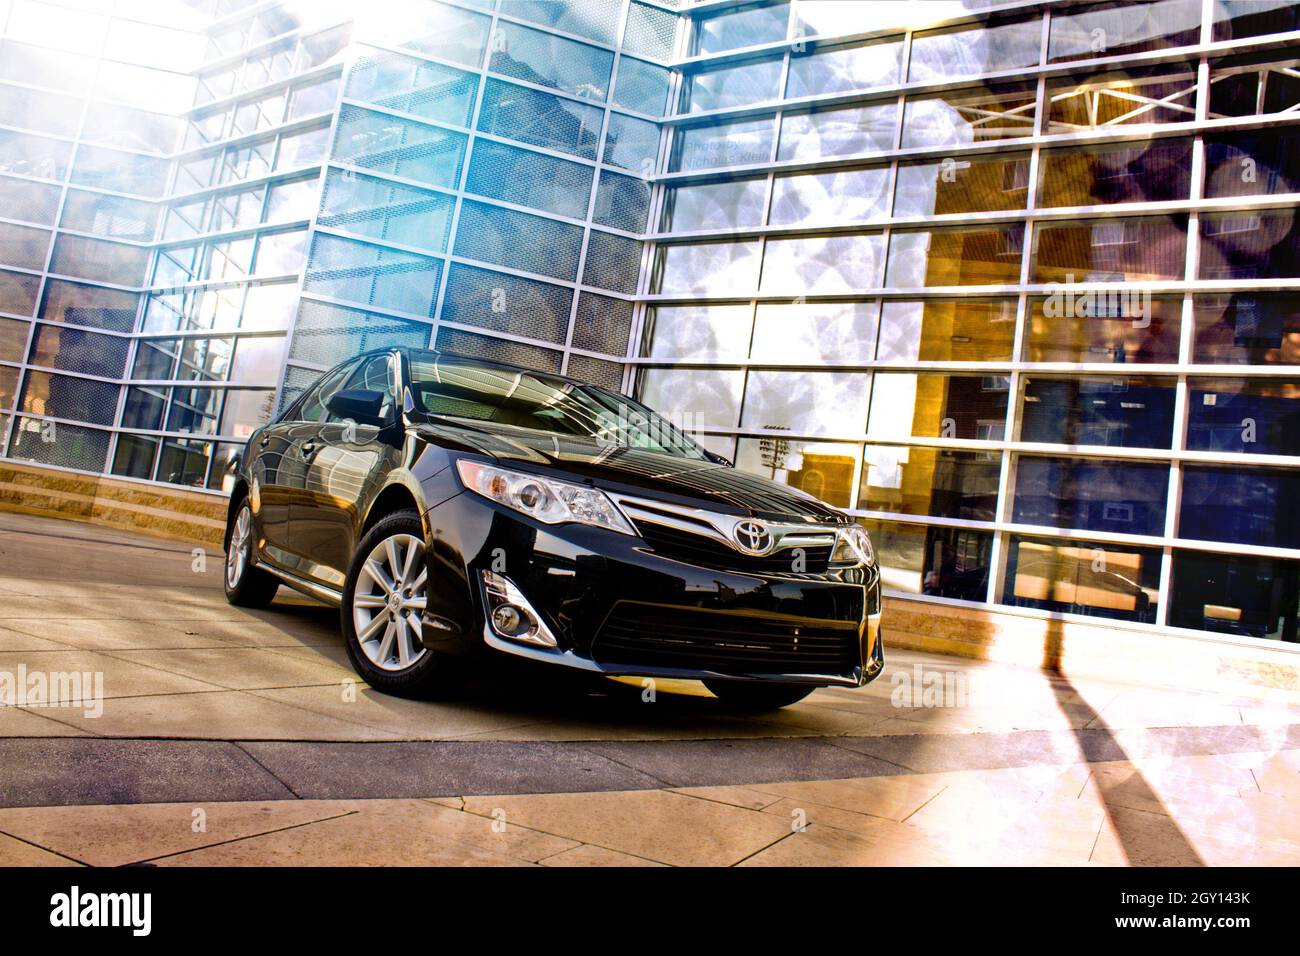 Toyota Camry in an urban setting with a glass-paneled building in the background Stock Photo